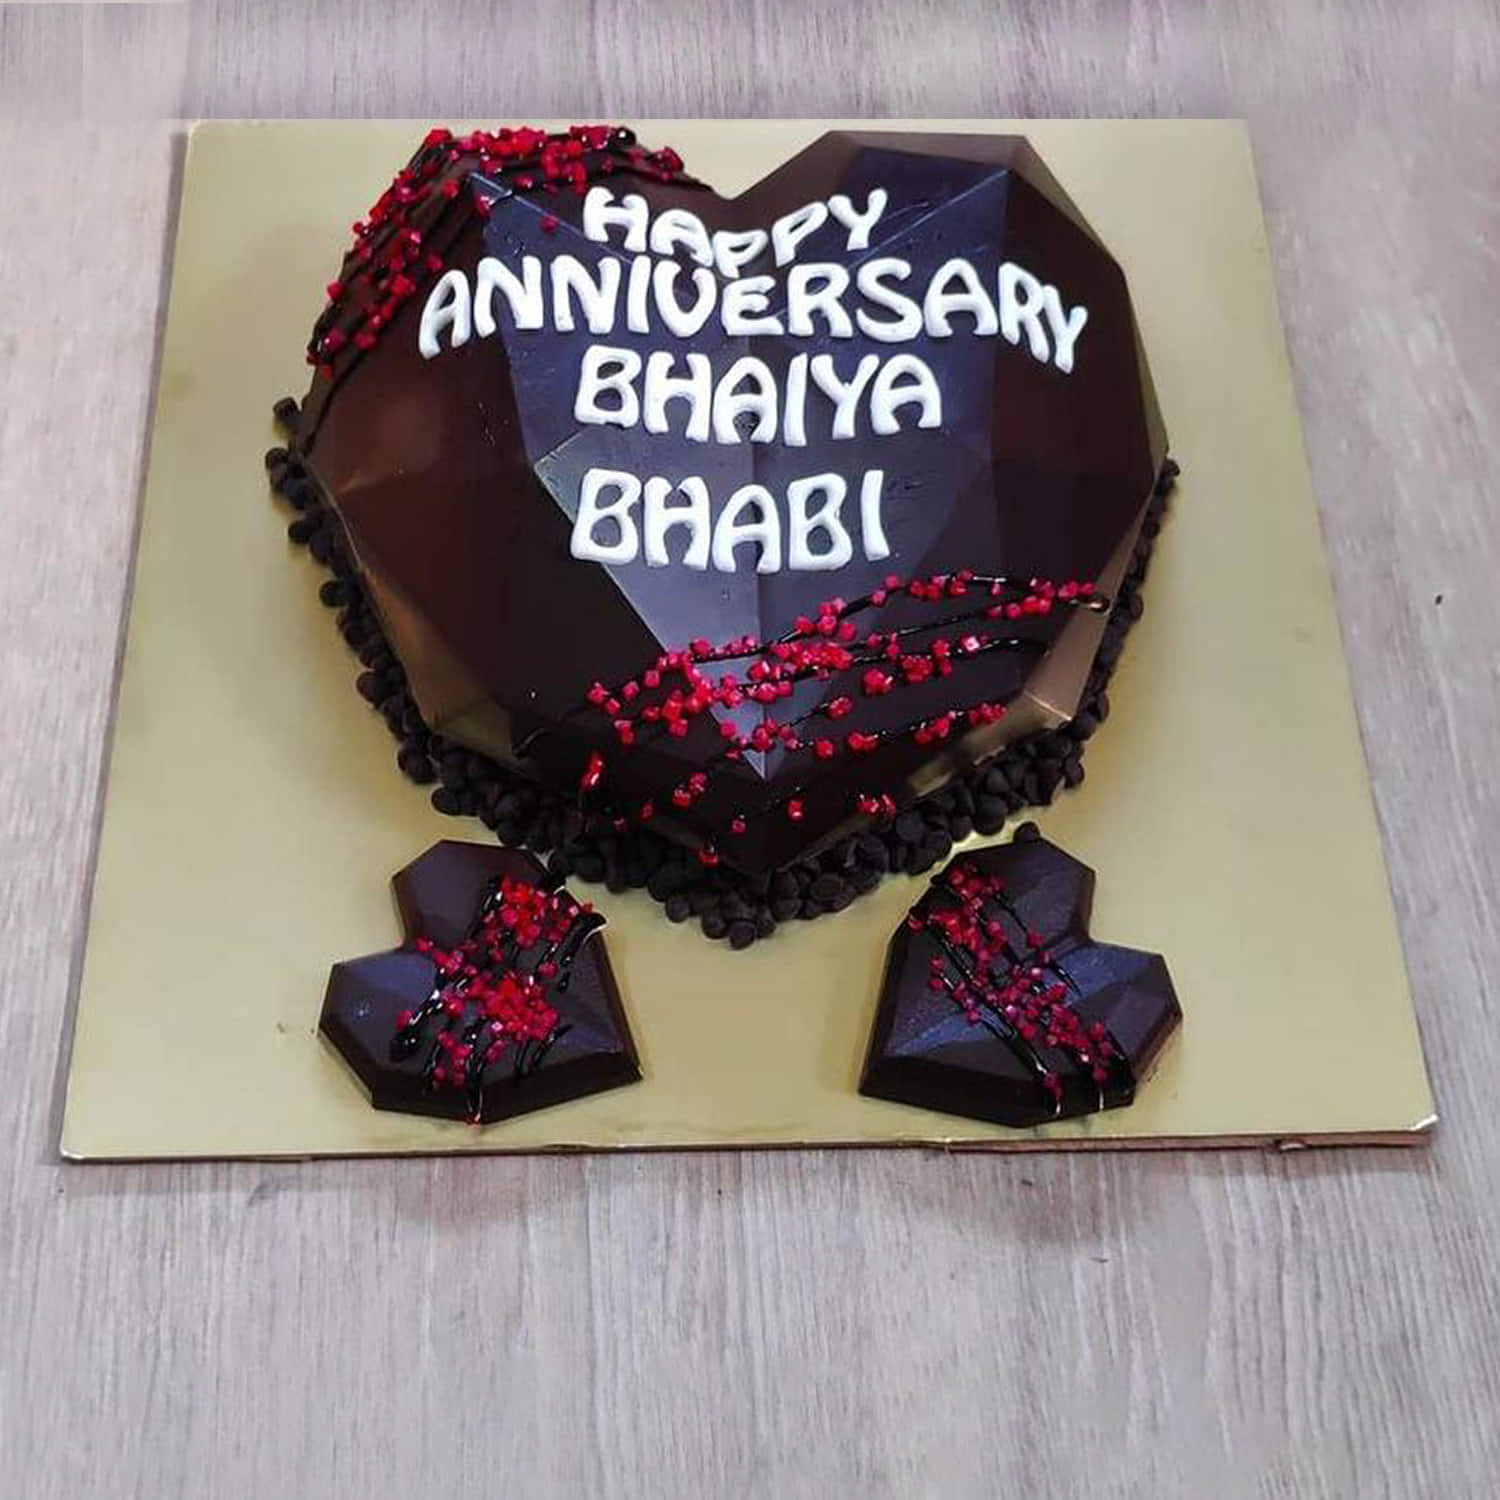 How to Order a Gift for Bhabhi on Her Marriage Anniversary